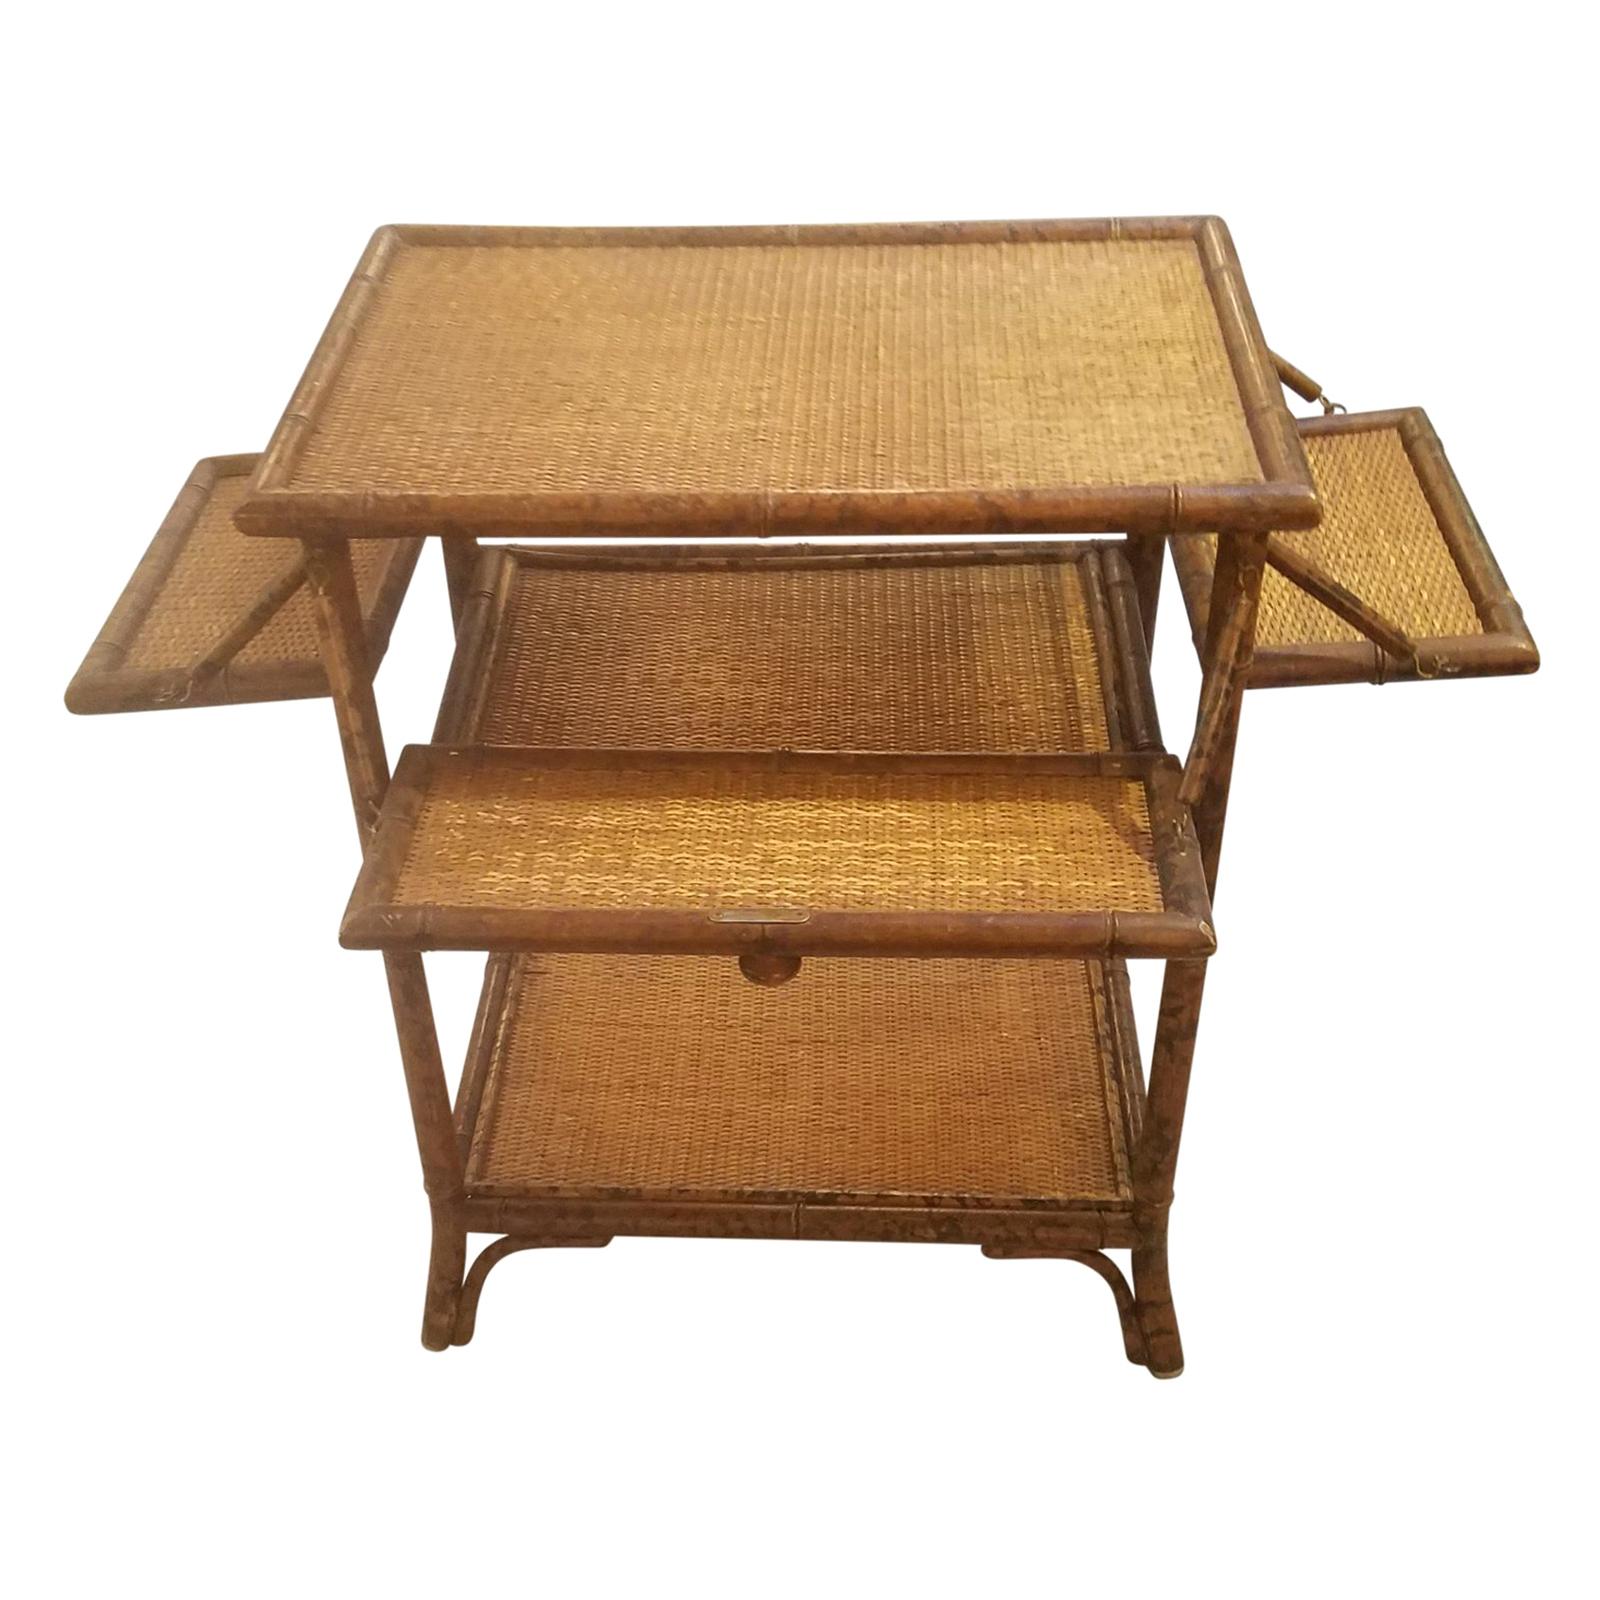 1930s Victorian Tortoise Bamboo End Table with Fold Out Shelves